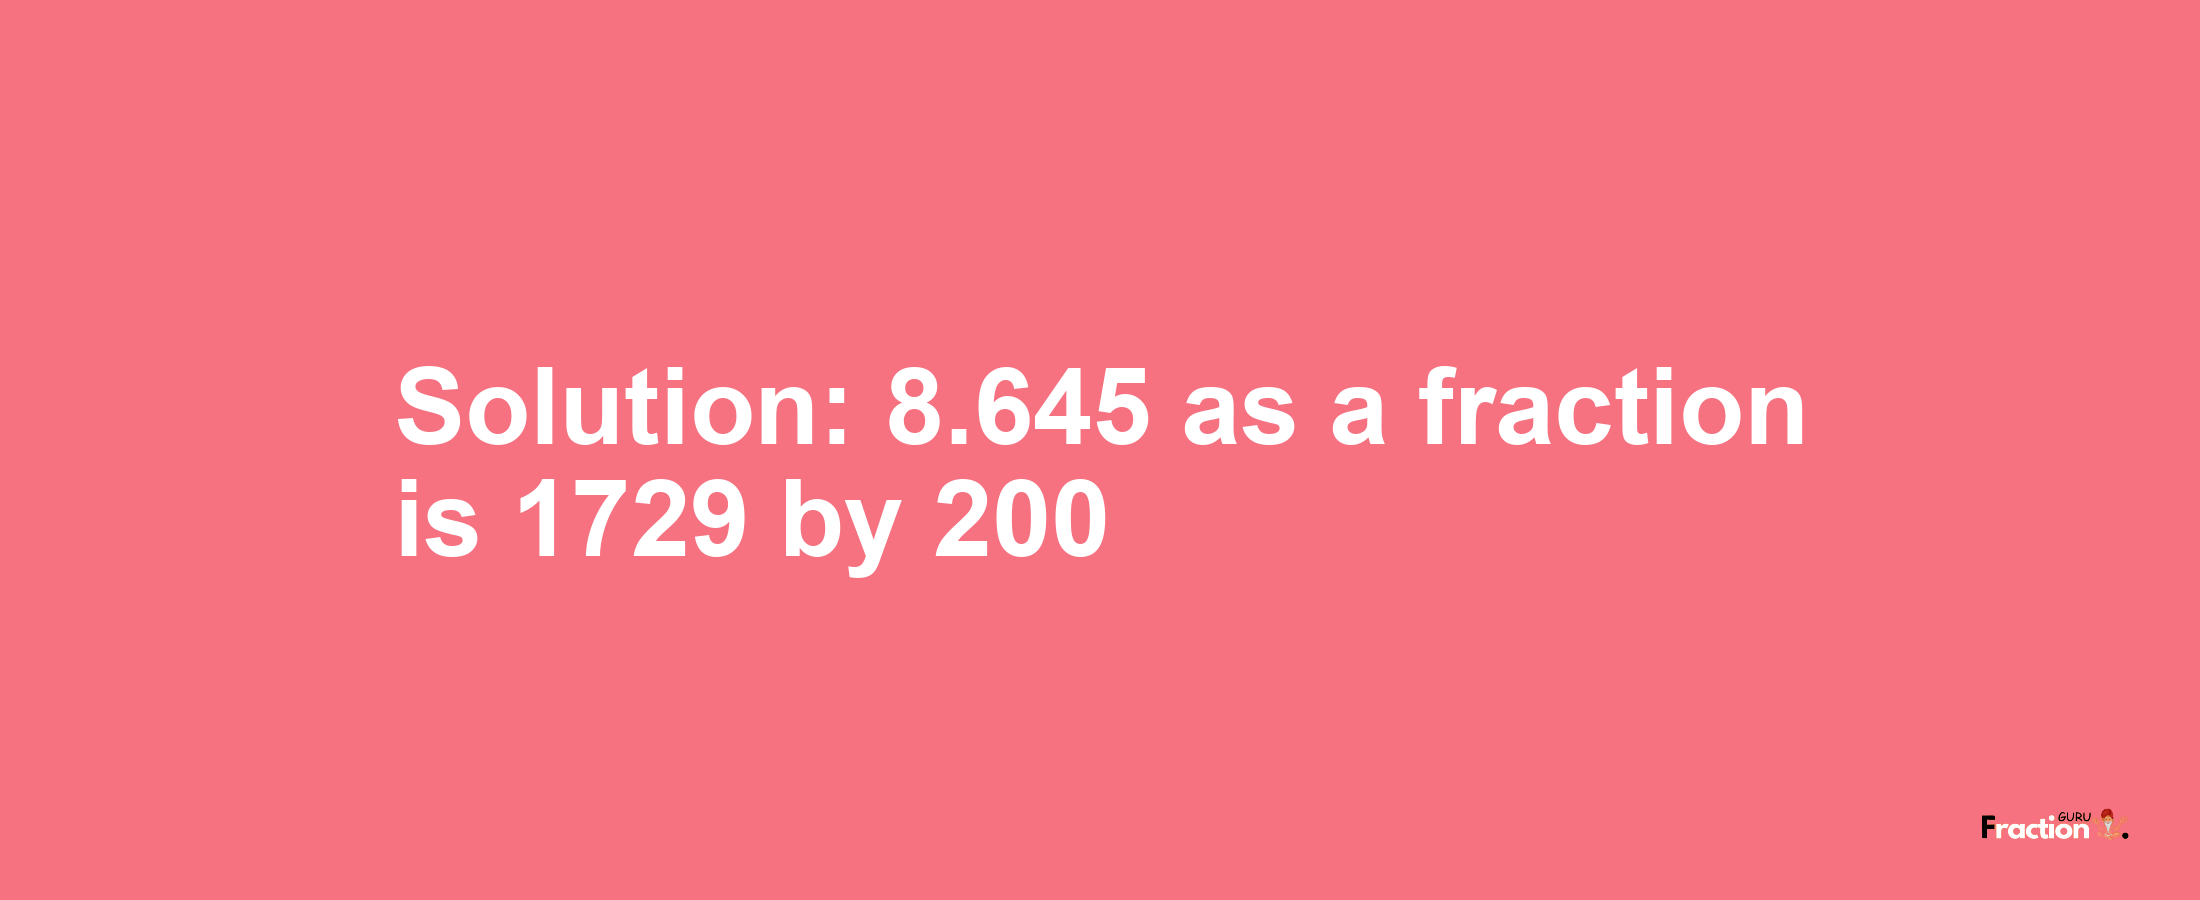 Solution:8.645 as a fraction is 1729/200